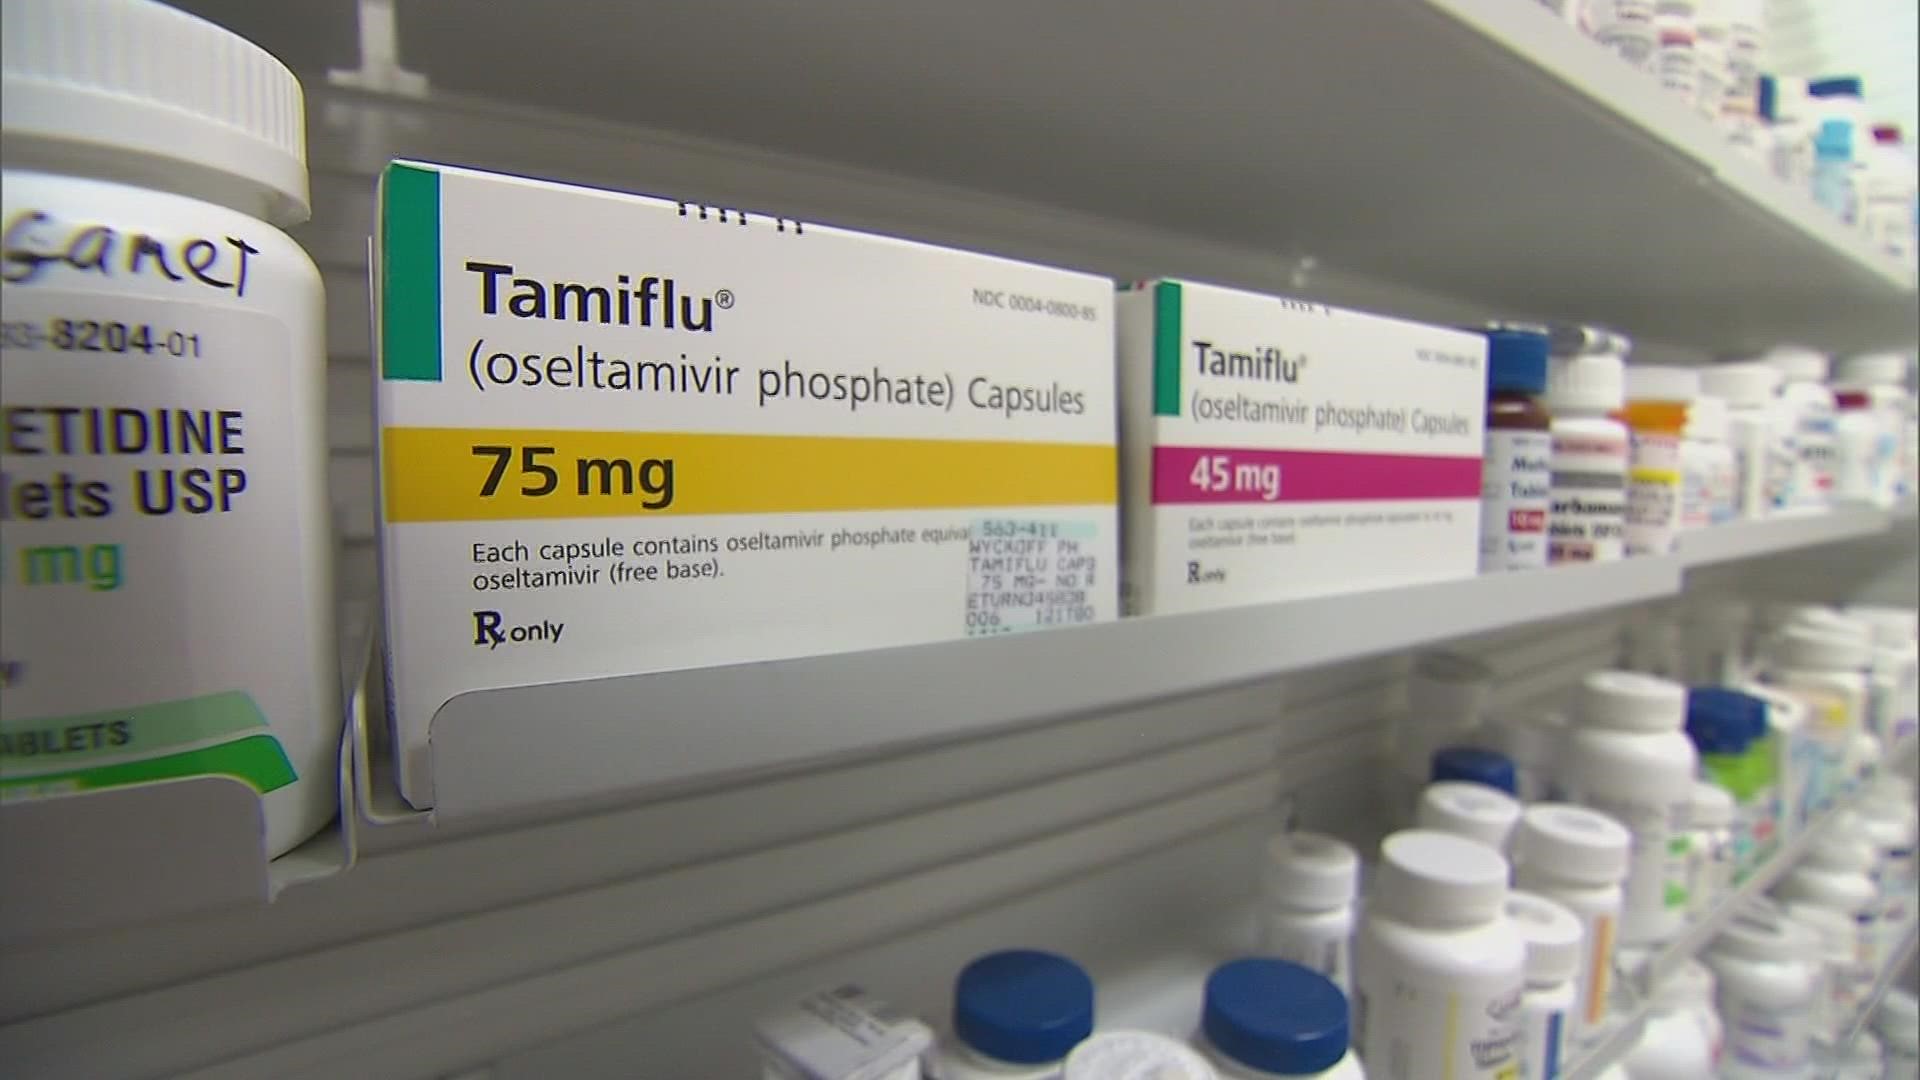 Last week, HHS announced it would allow states to dip into statewide stockpiles for Tamiflu, making millions of treatment courses available.